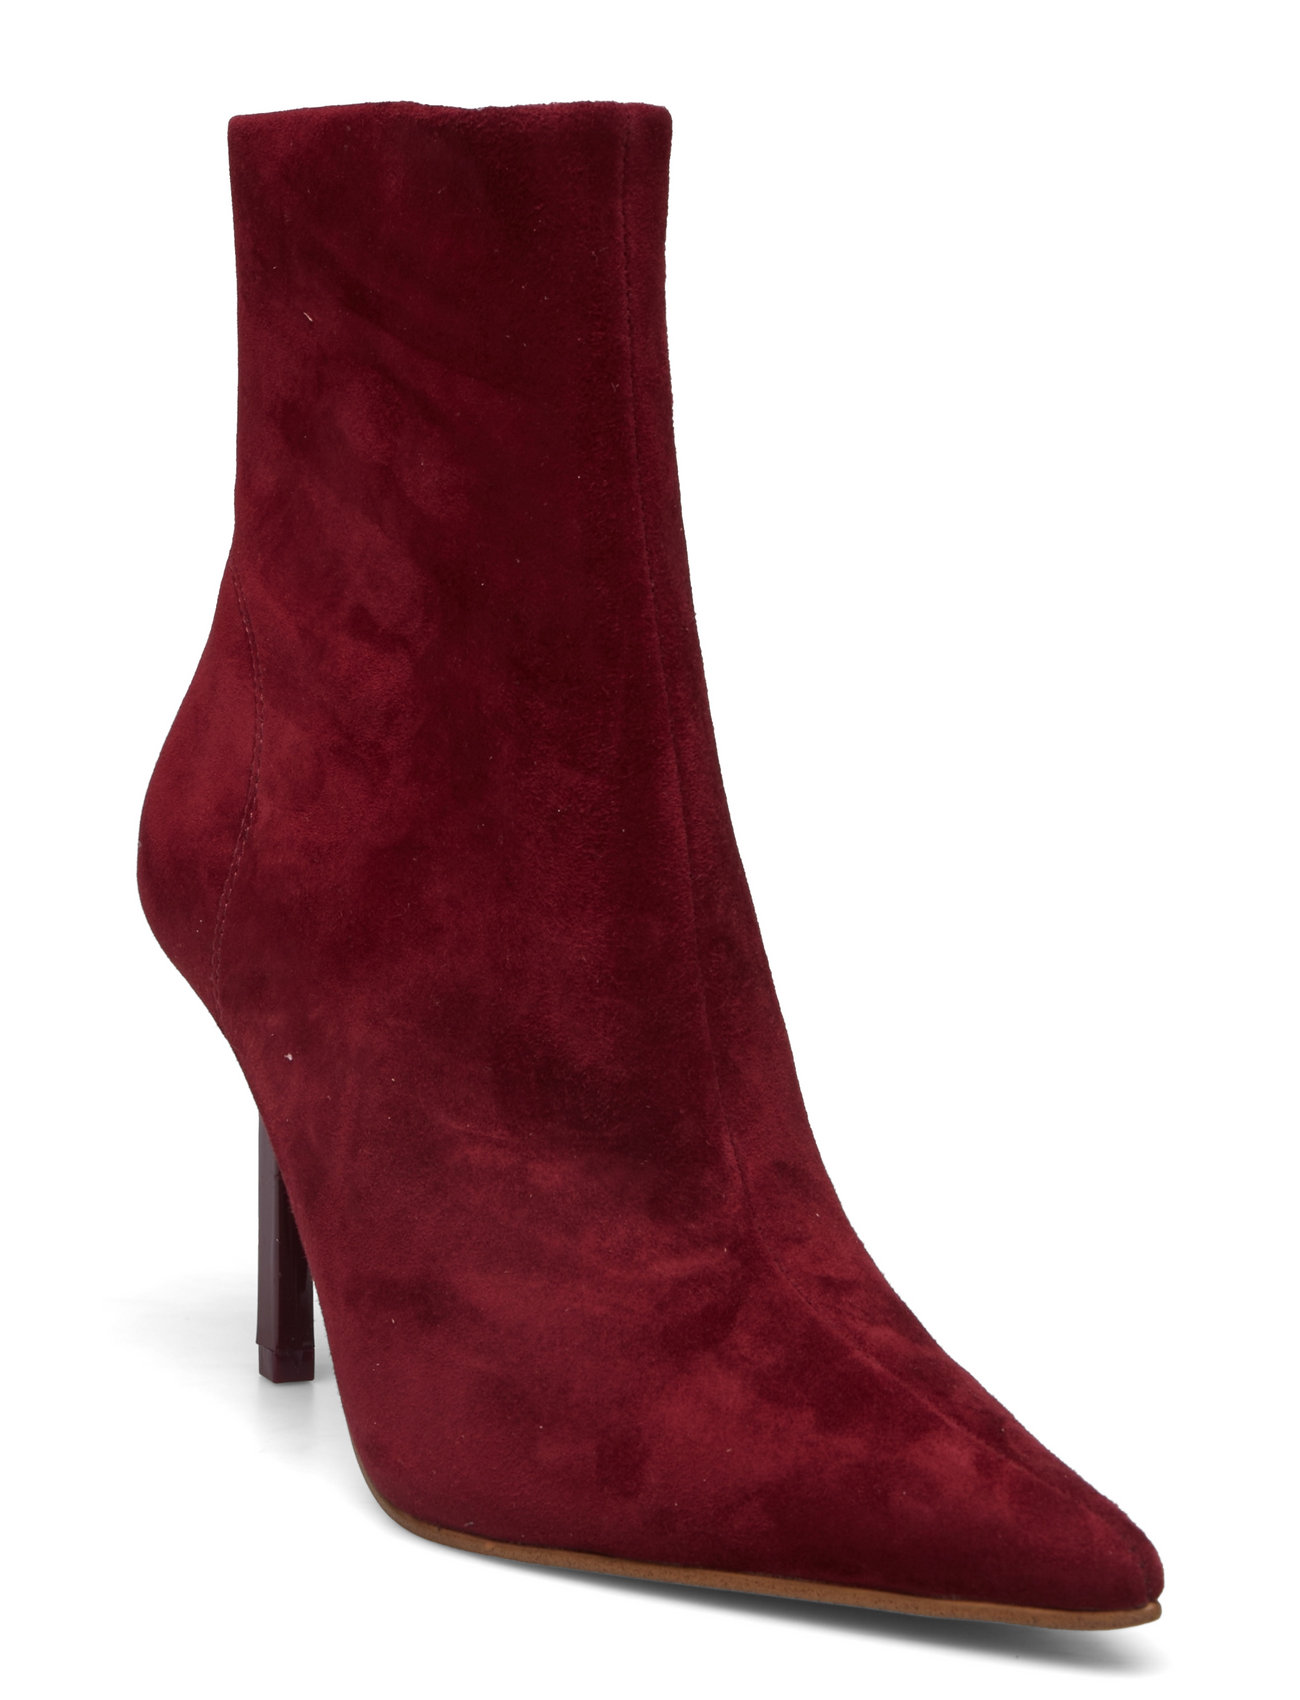 Iyanna Bootie Shoes Boots Ankle Boots Ankle Boots With Heel Burgundy Steve Madden